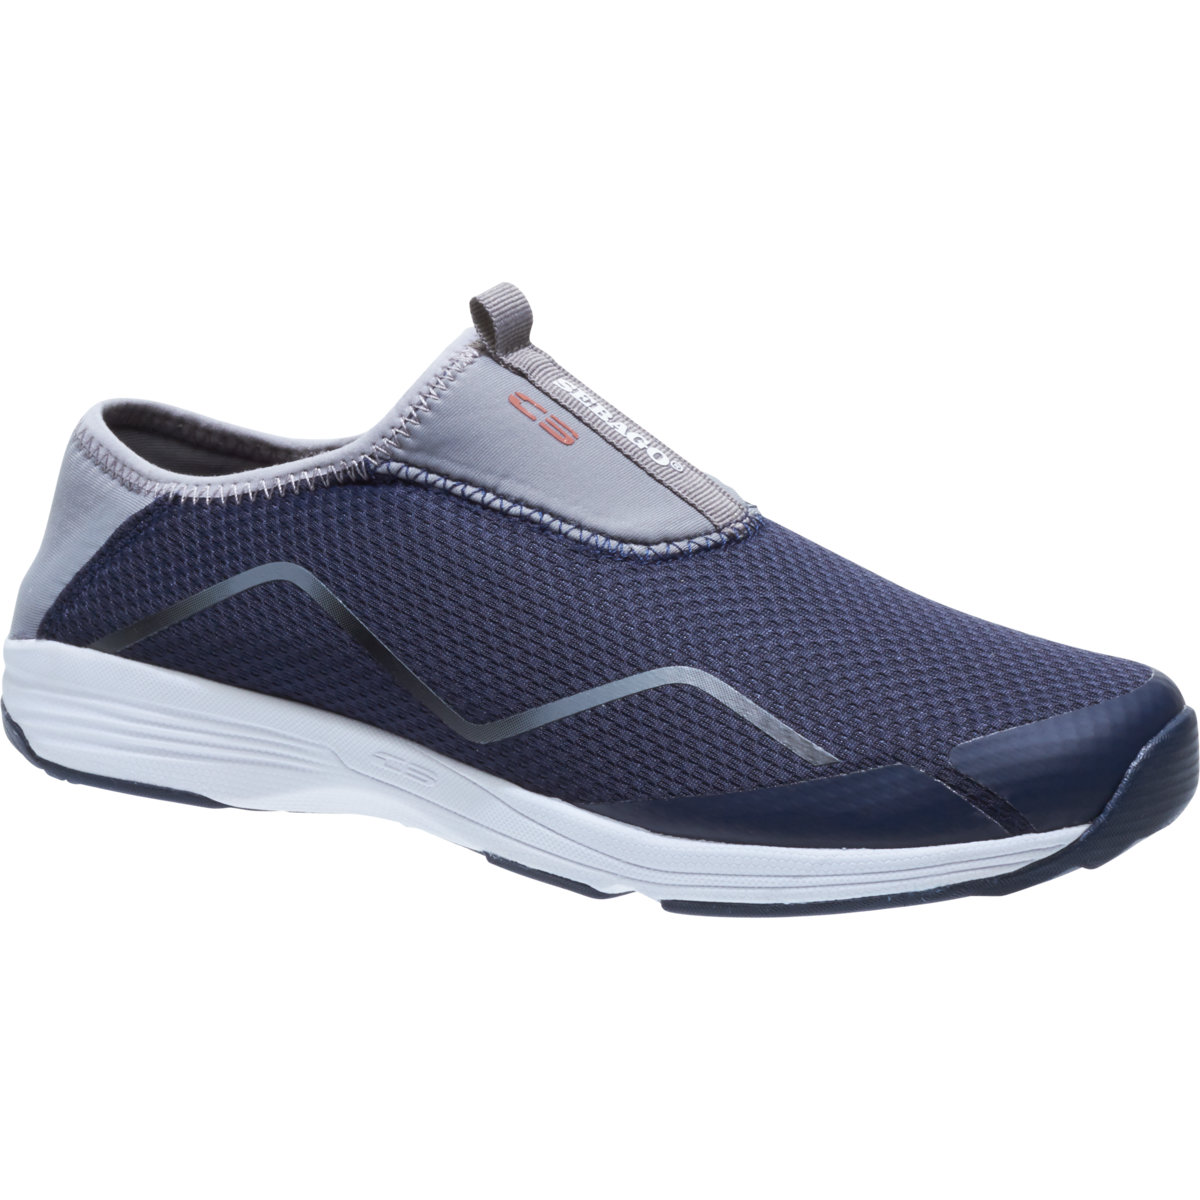 Cyphon Technical Sailing Slip On Trainer